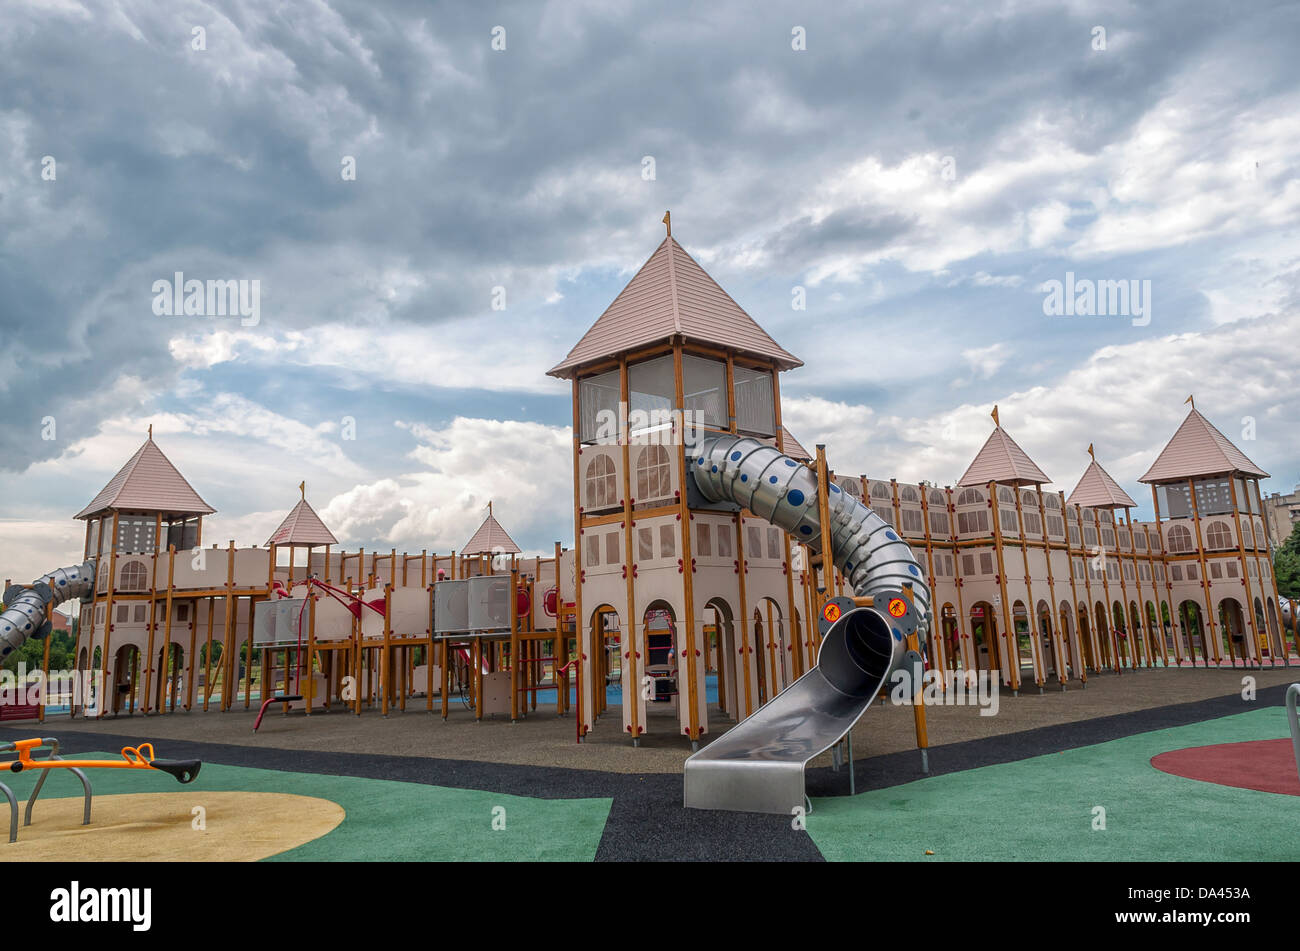 Colorful playground for childrens as a castle Stock Photo